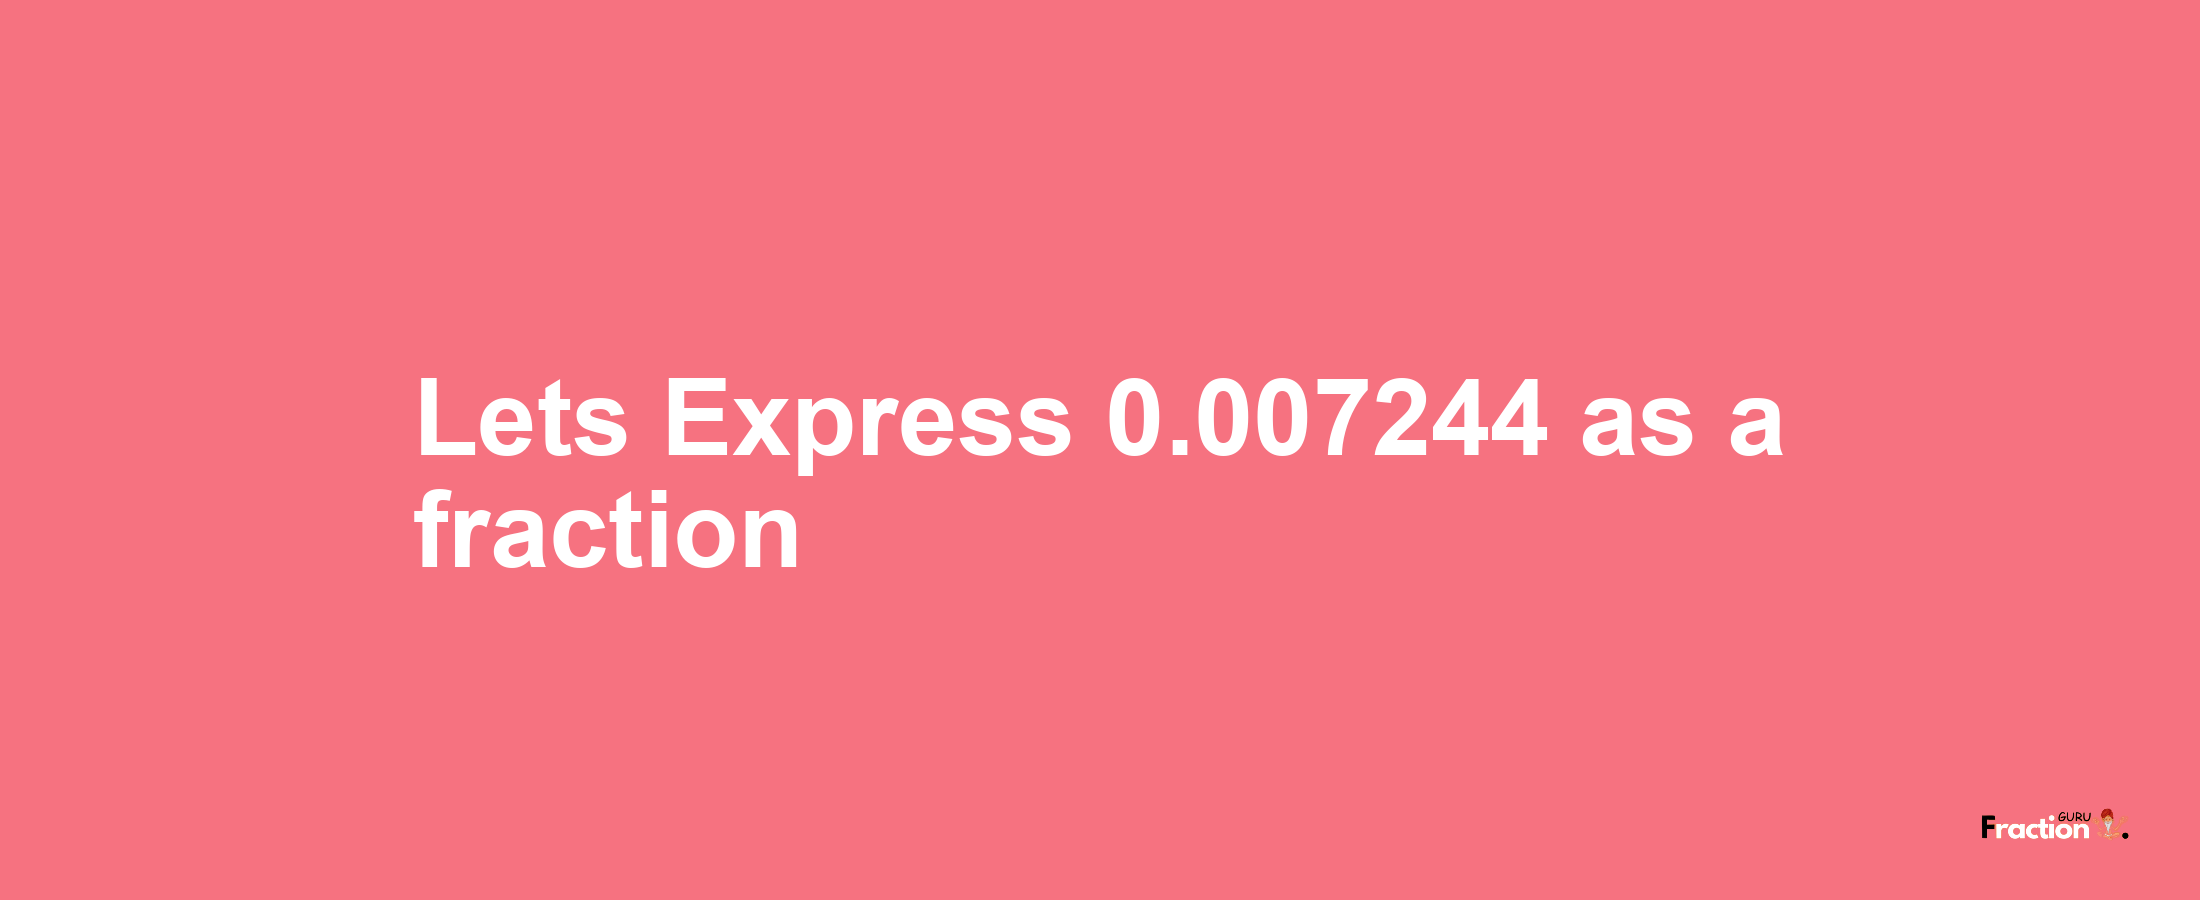 Lets Express 0.007244 as afraction